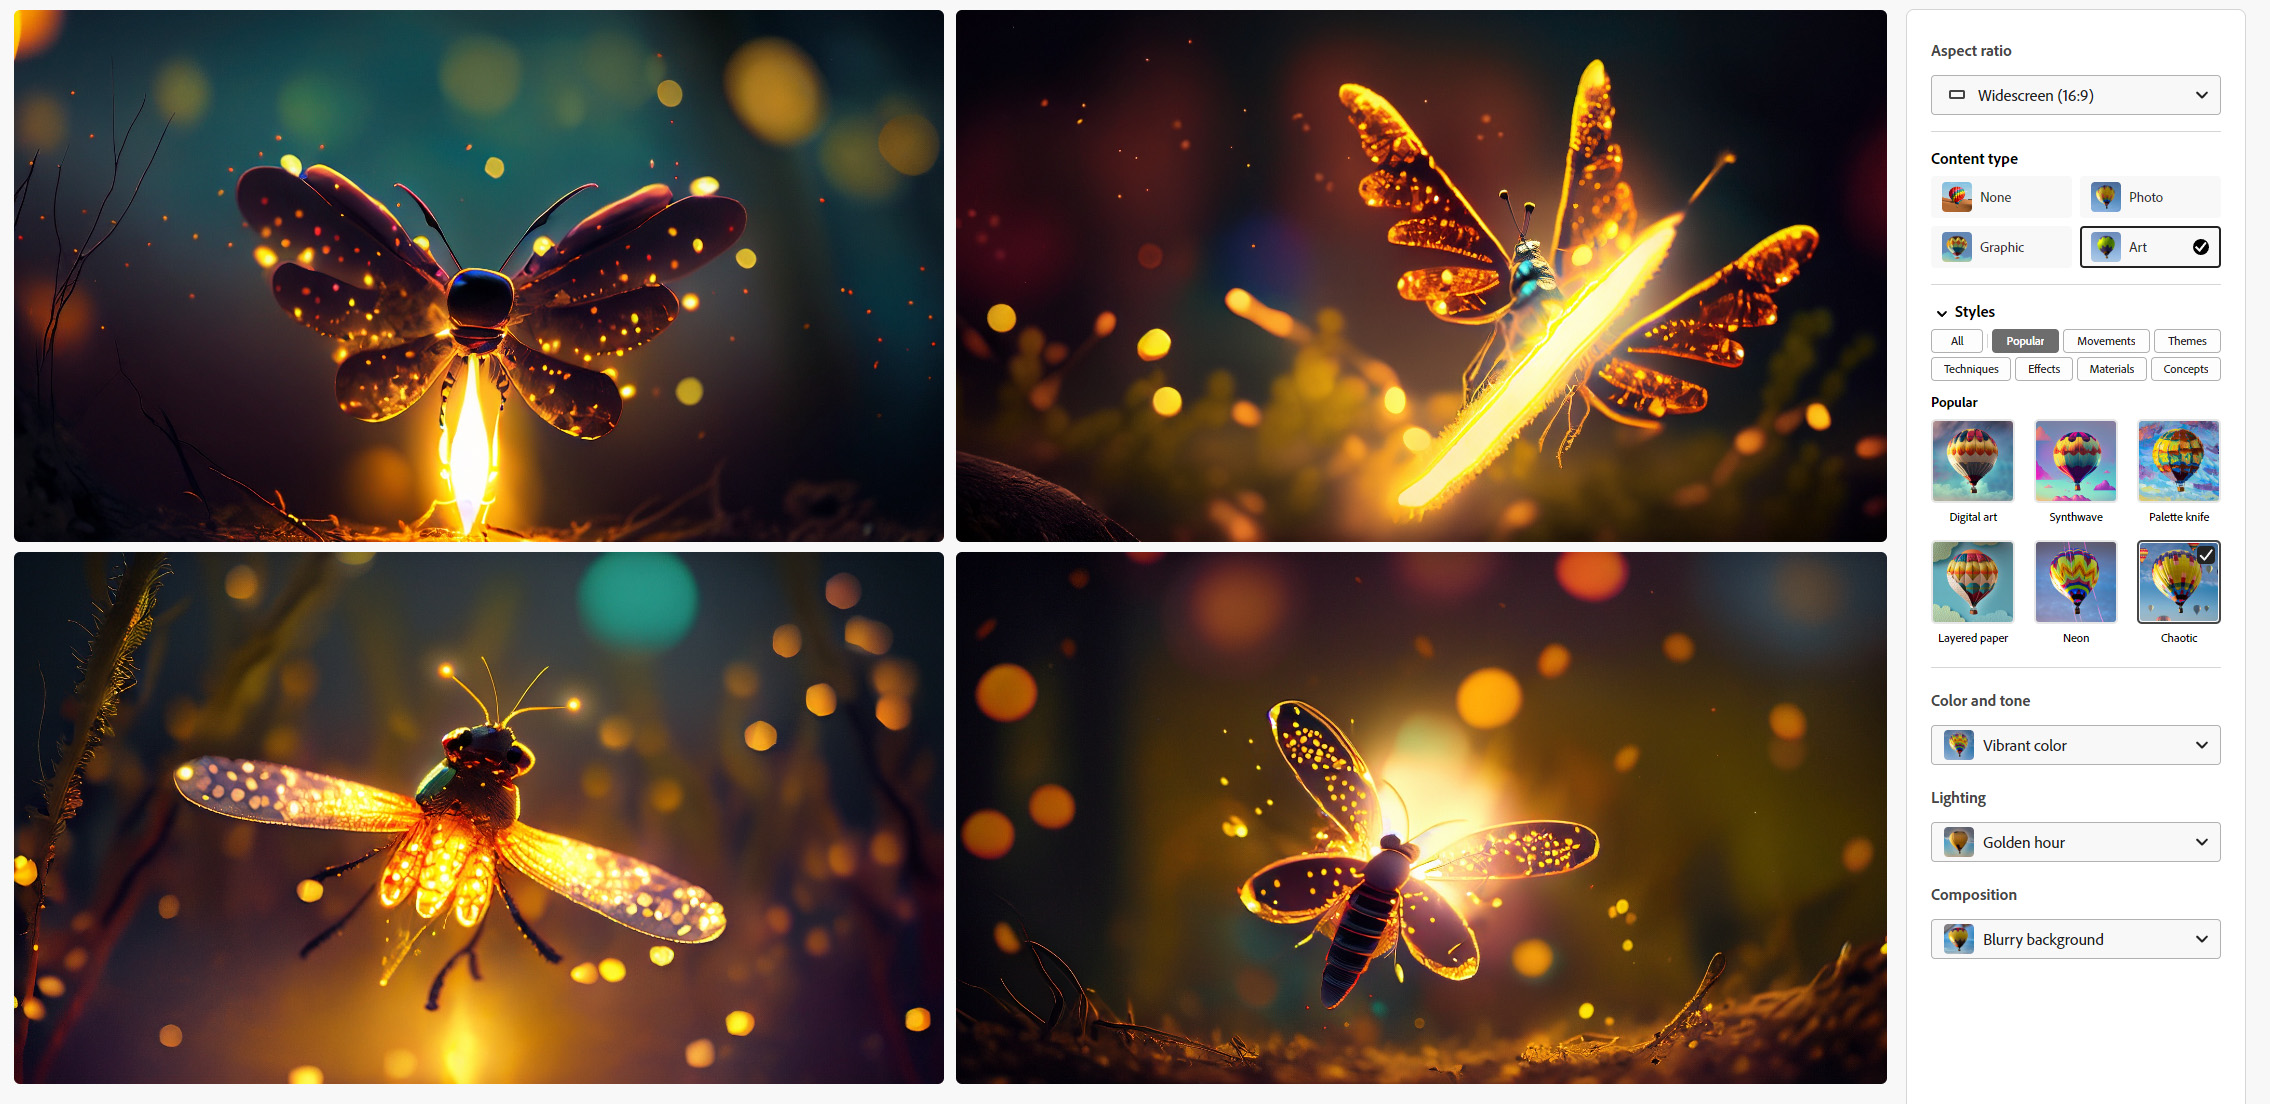 Taming Firefly: Essential Tips for Prompting Adobe's Image Generation AI